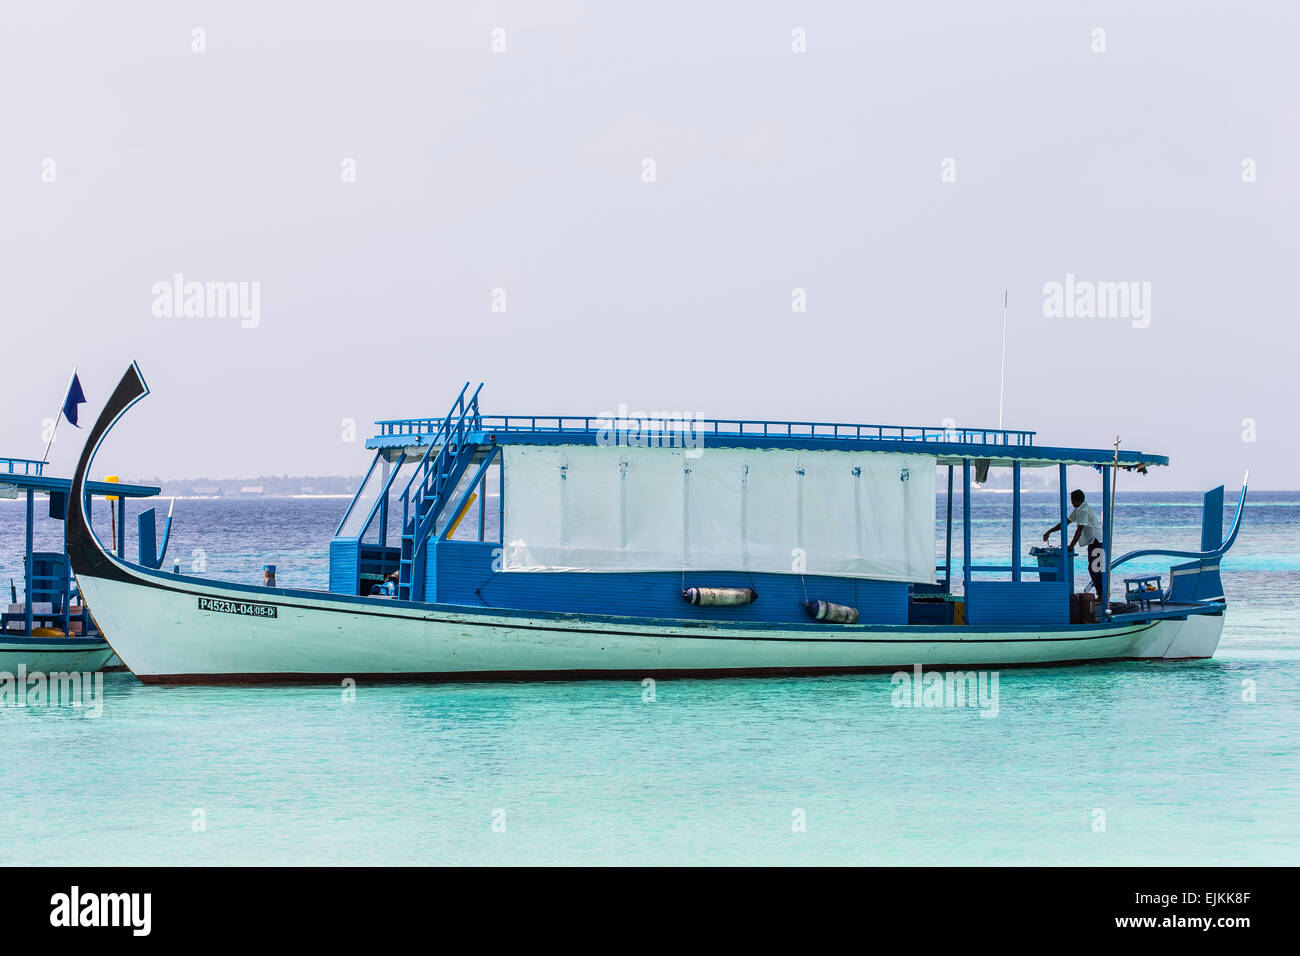 A Dhoni boat coming in to moor up at Makunudu in the Maldives Stock Photo